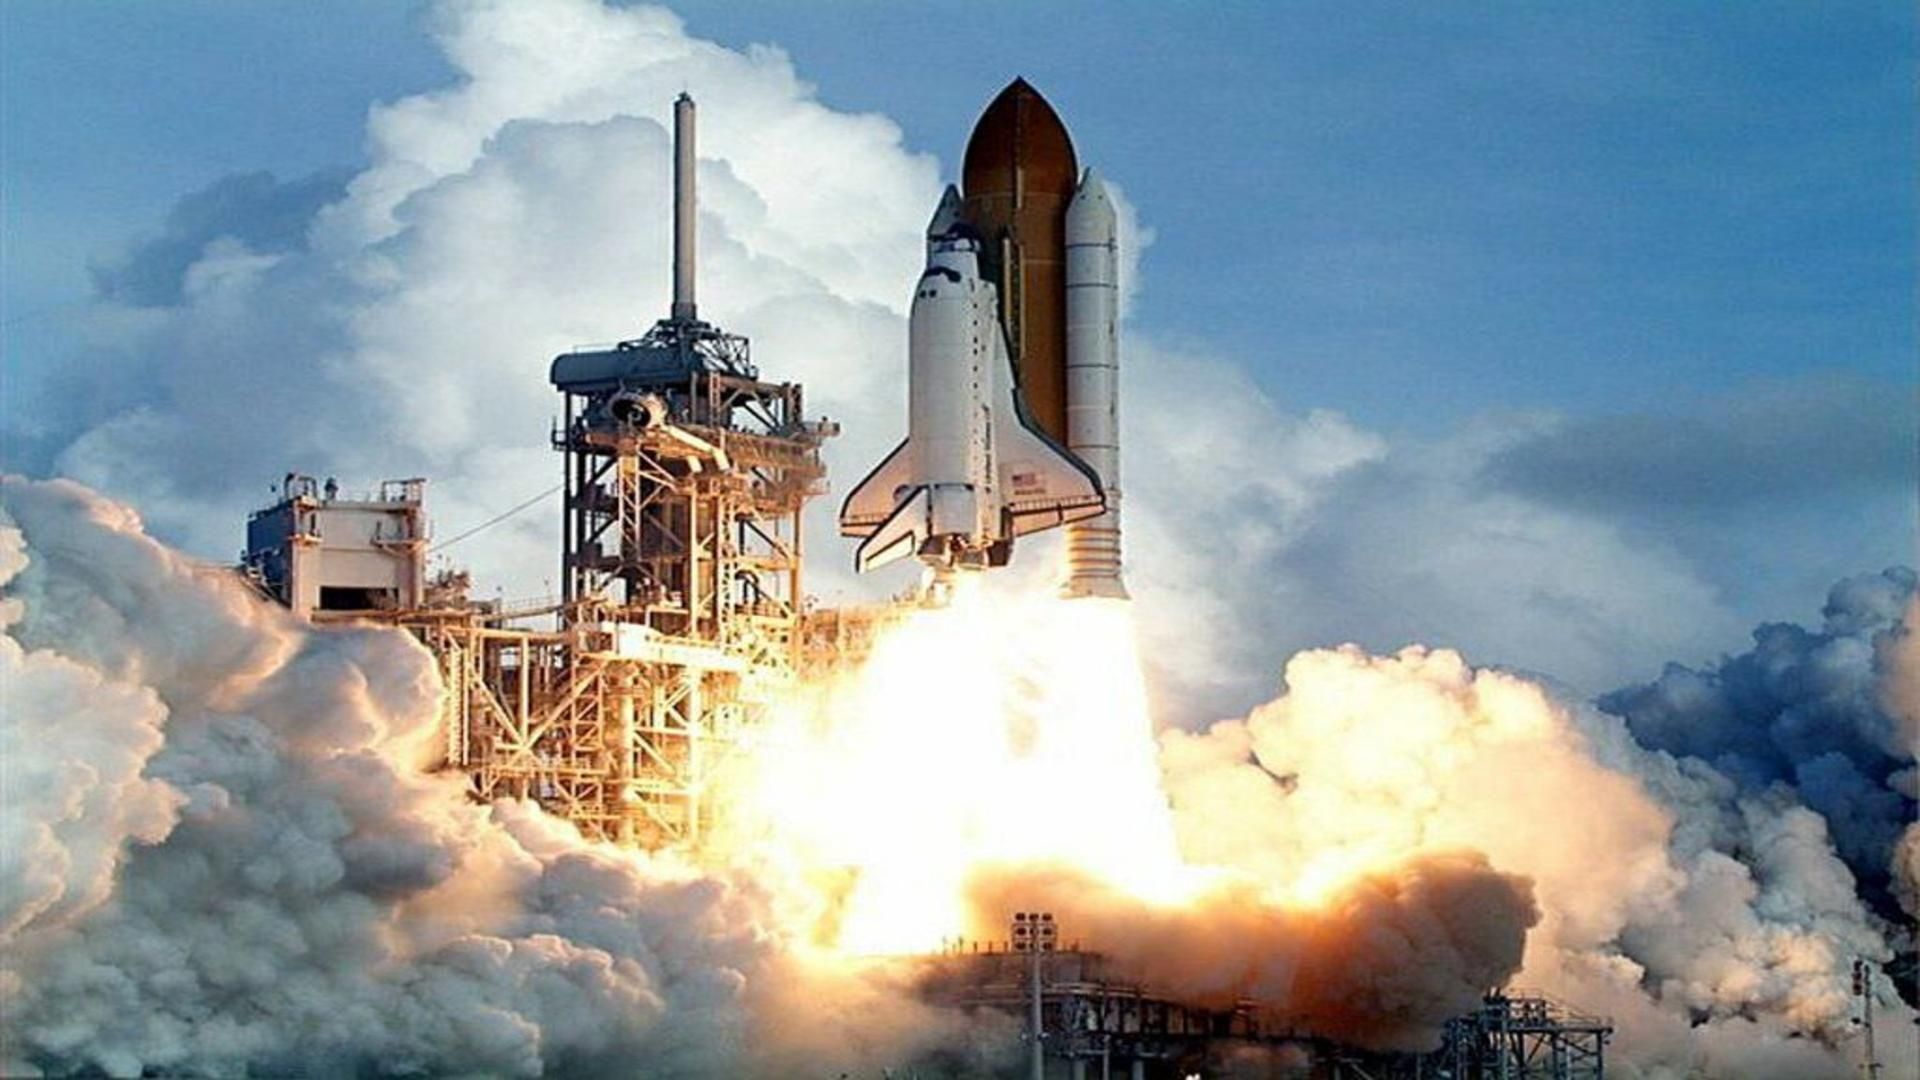 Columbia shuttle launching into space free desktop background